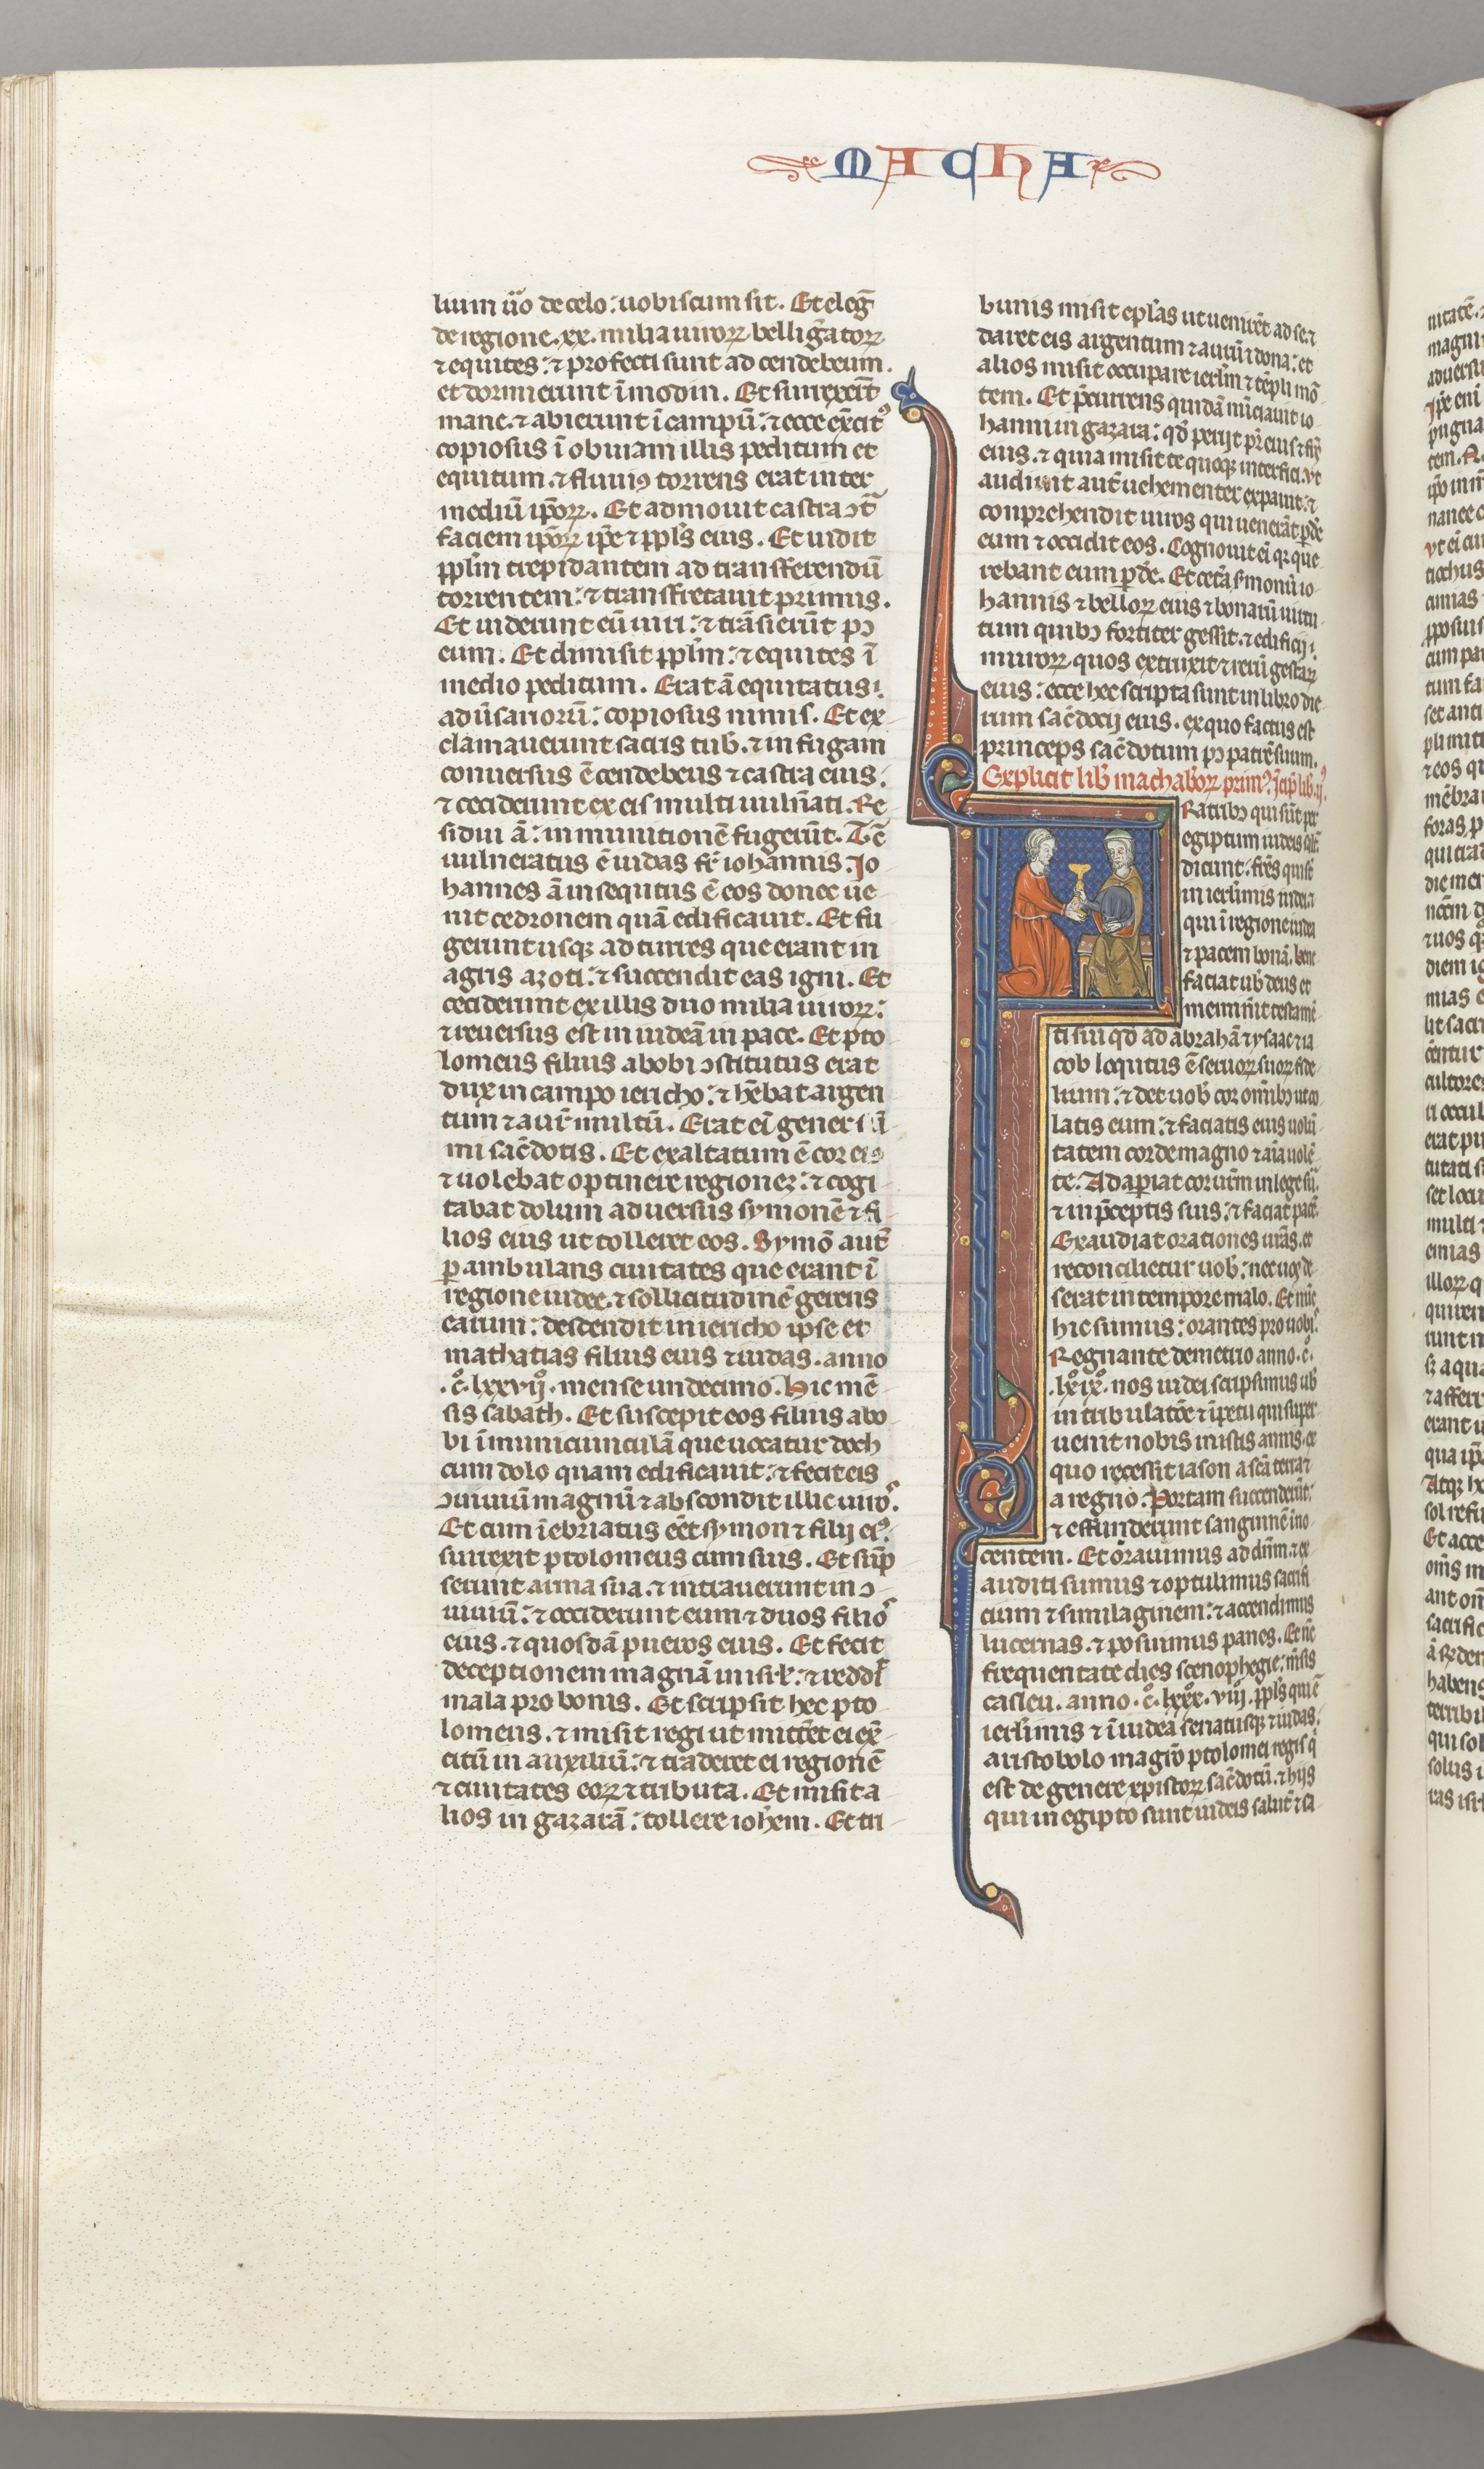 Fol. 382v, Maccabees II, historiated initial F, a golden chalice presented to a Jew